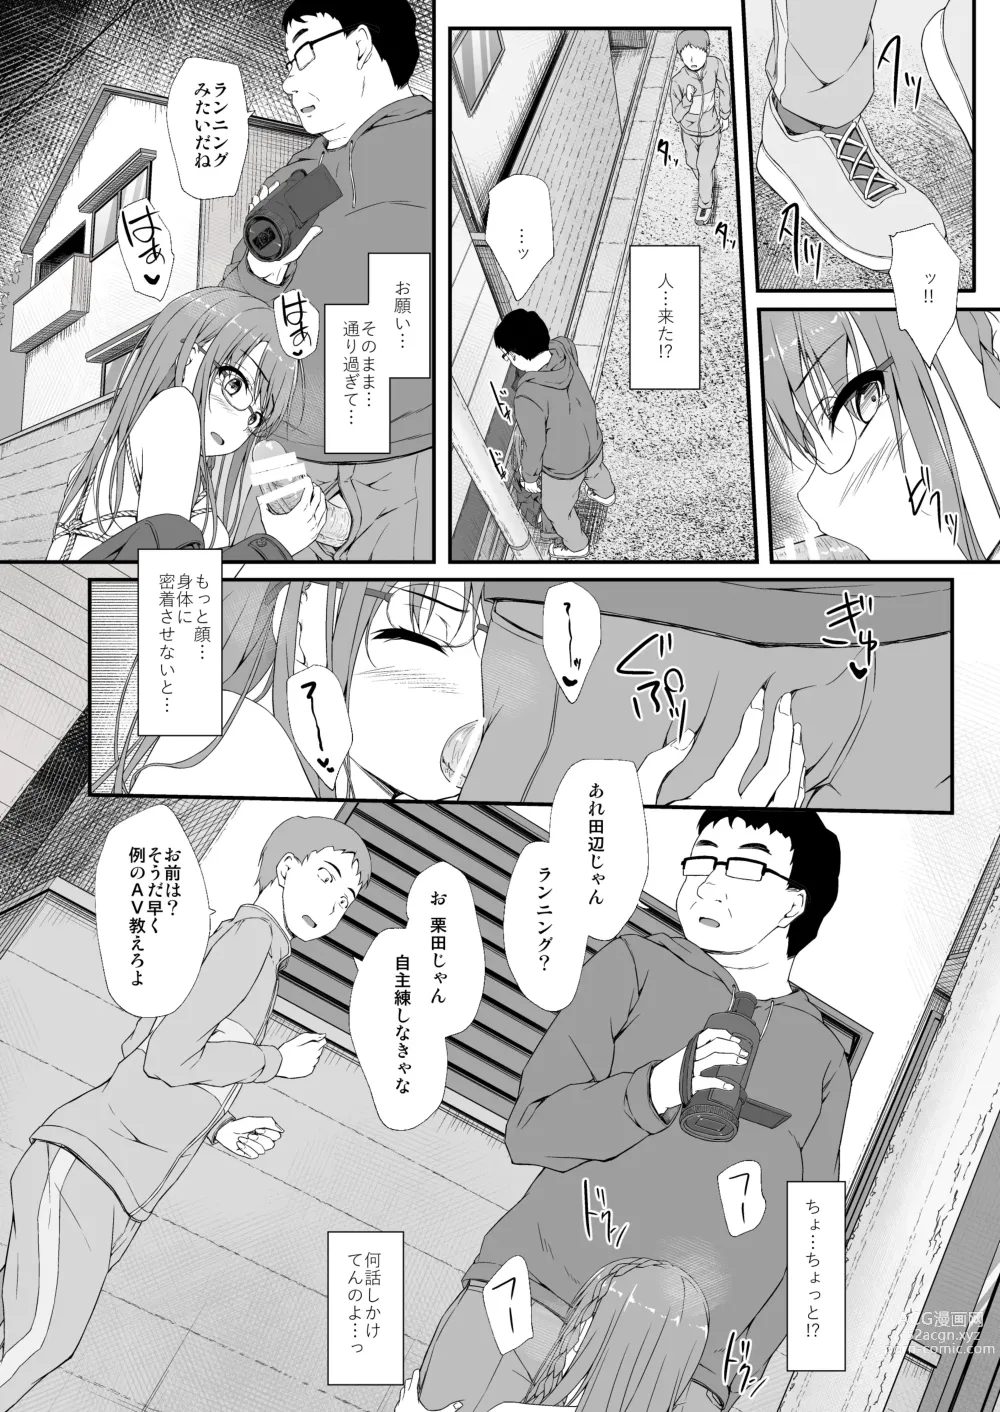 Page 45 of doujinshi Re:Temptation 6